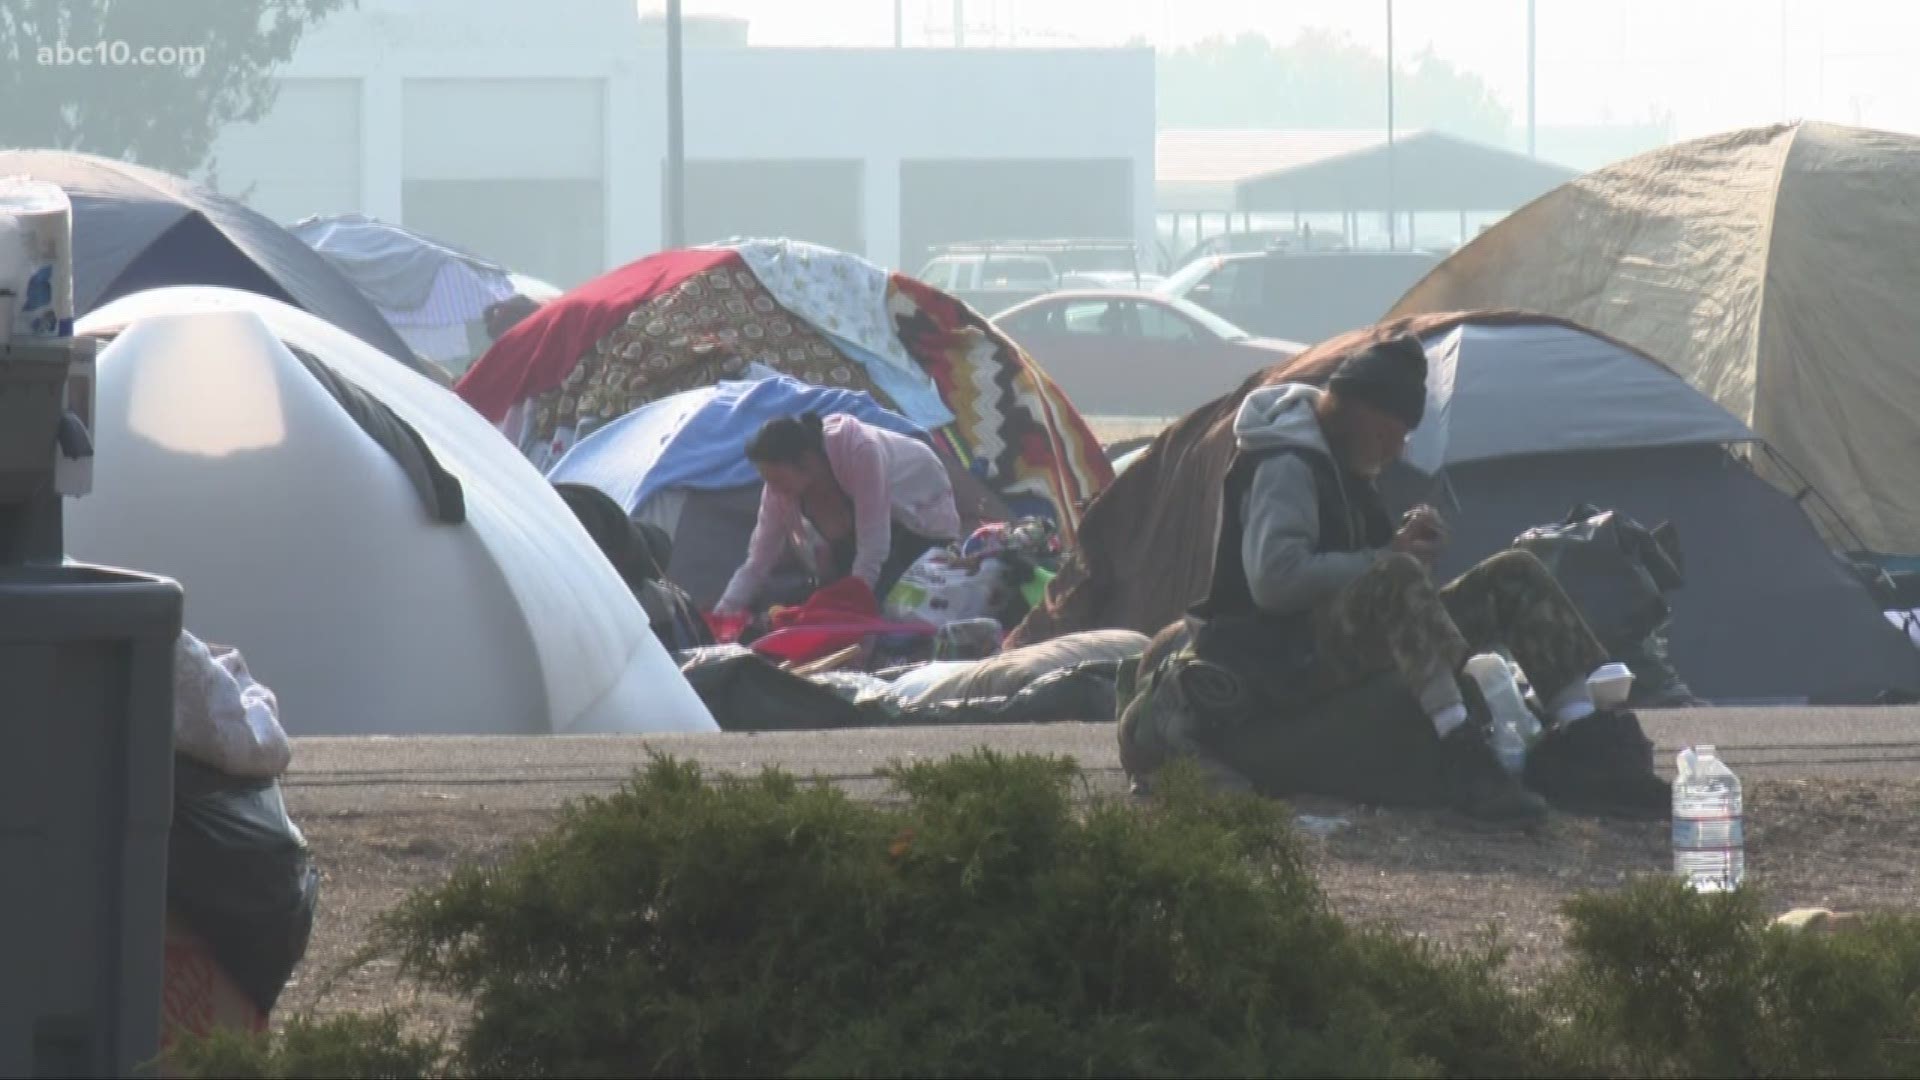 It's been over a week now since hundreds of families fled to the Walmart parking lot in Chico after they were forced to leave their homes. Many of them packed up their belongings and left the unofficial camp and donation site.